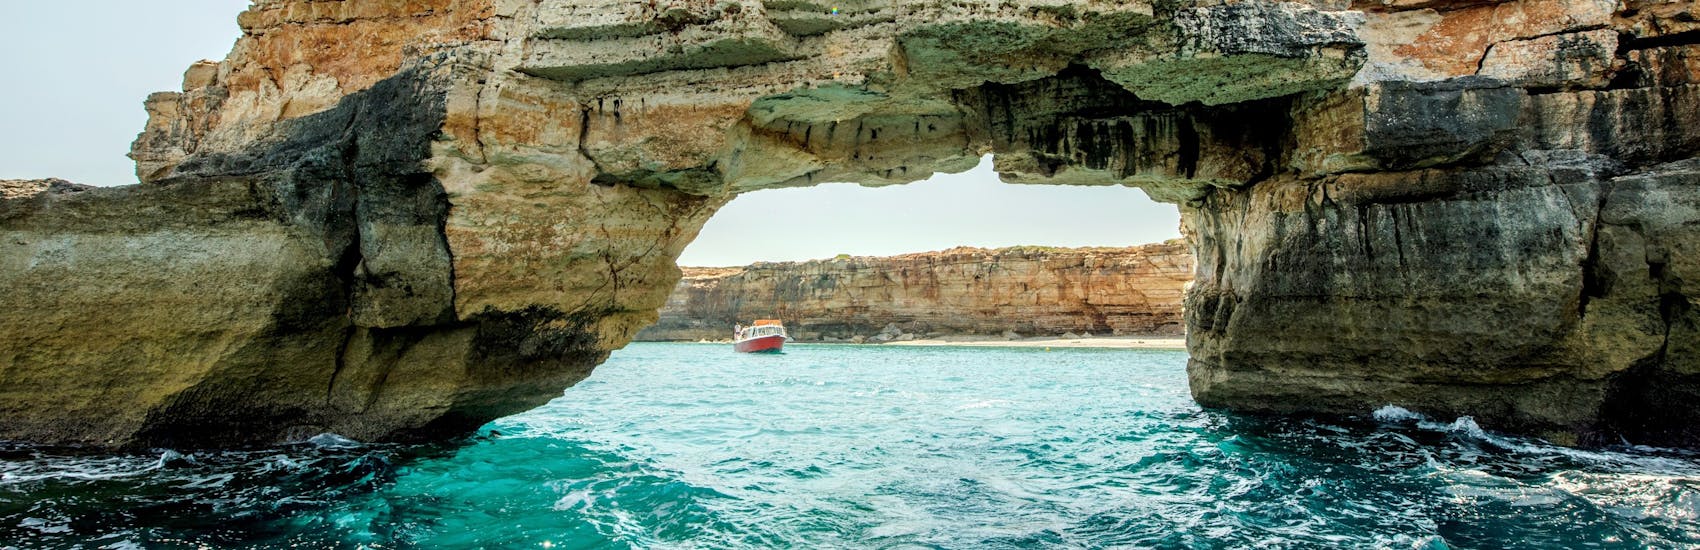 Boat Trip from Rethymno to Pirate Caves in Crete.